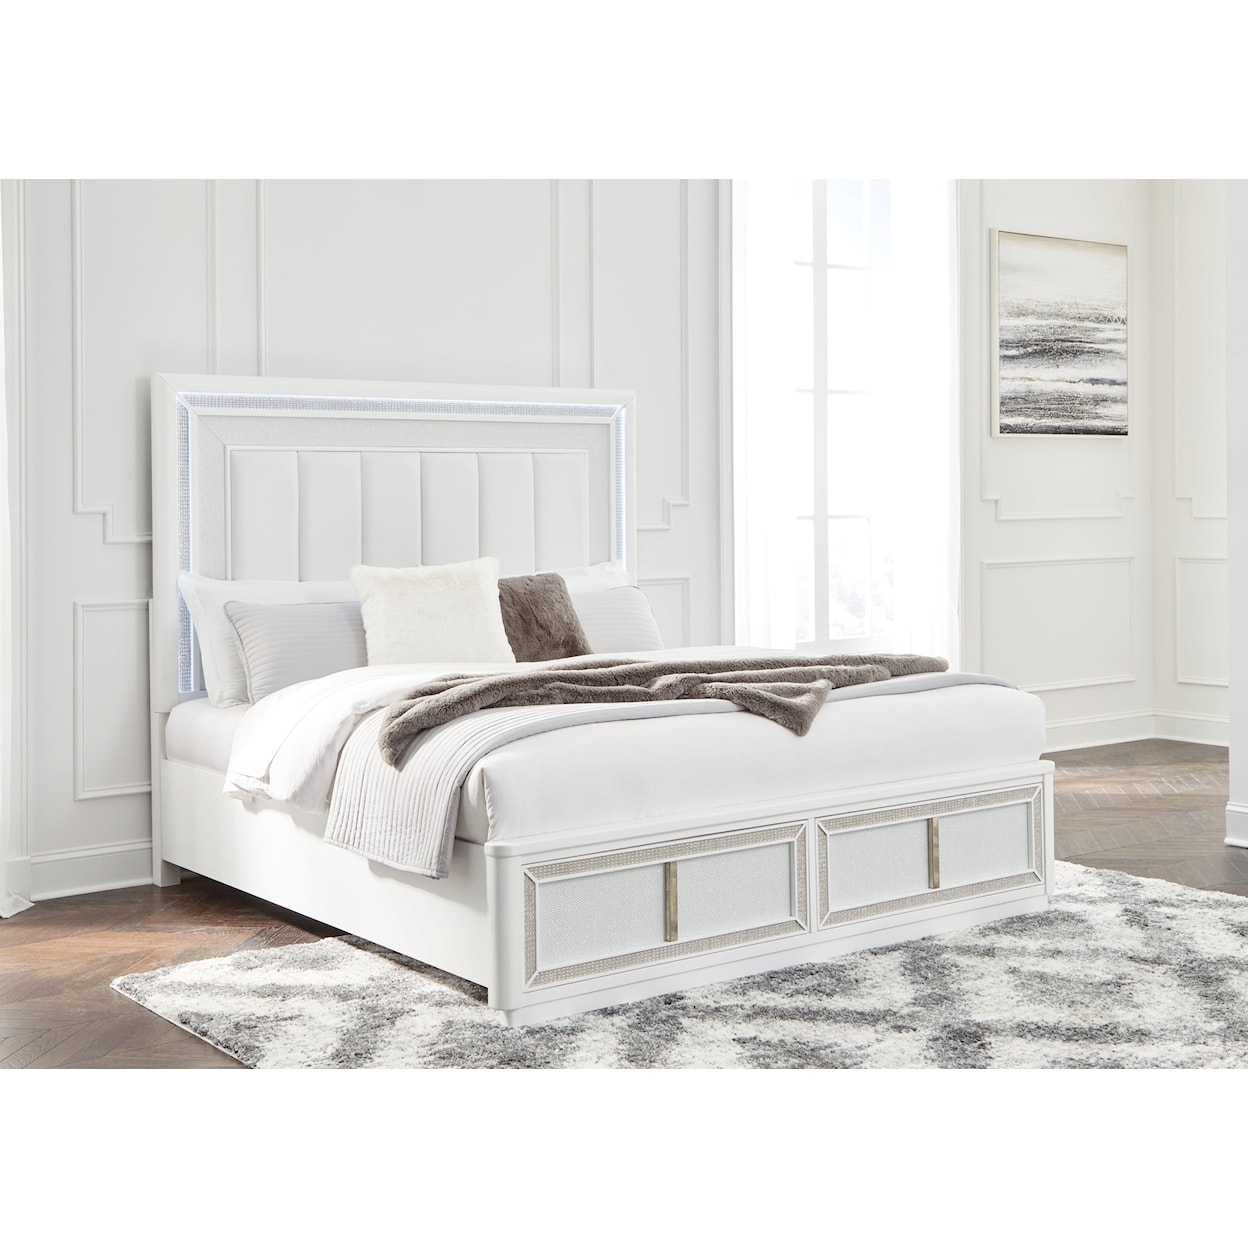 Signature Design by Ashley Chalanna Queen Bedroom Group